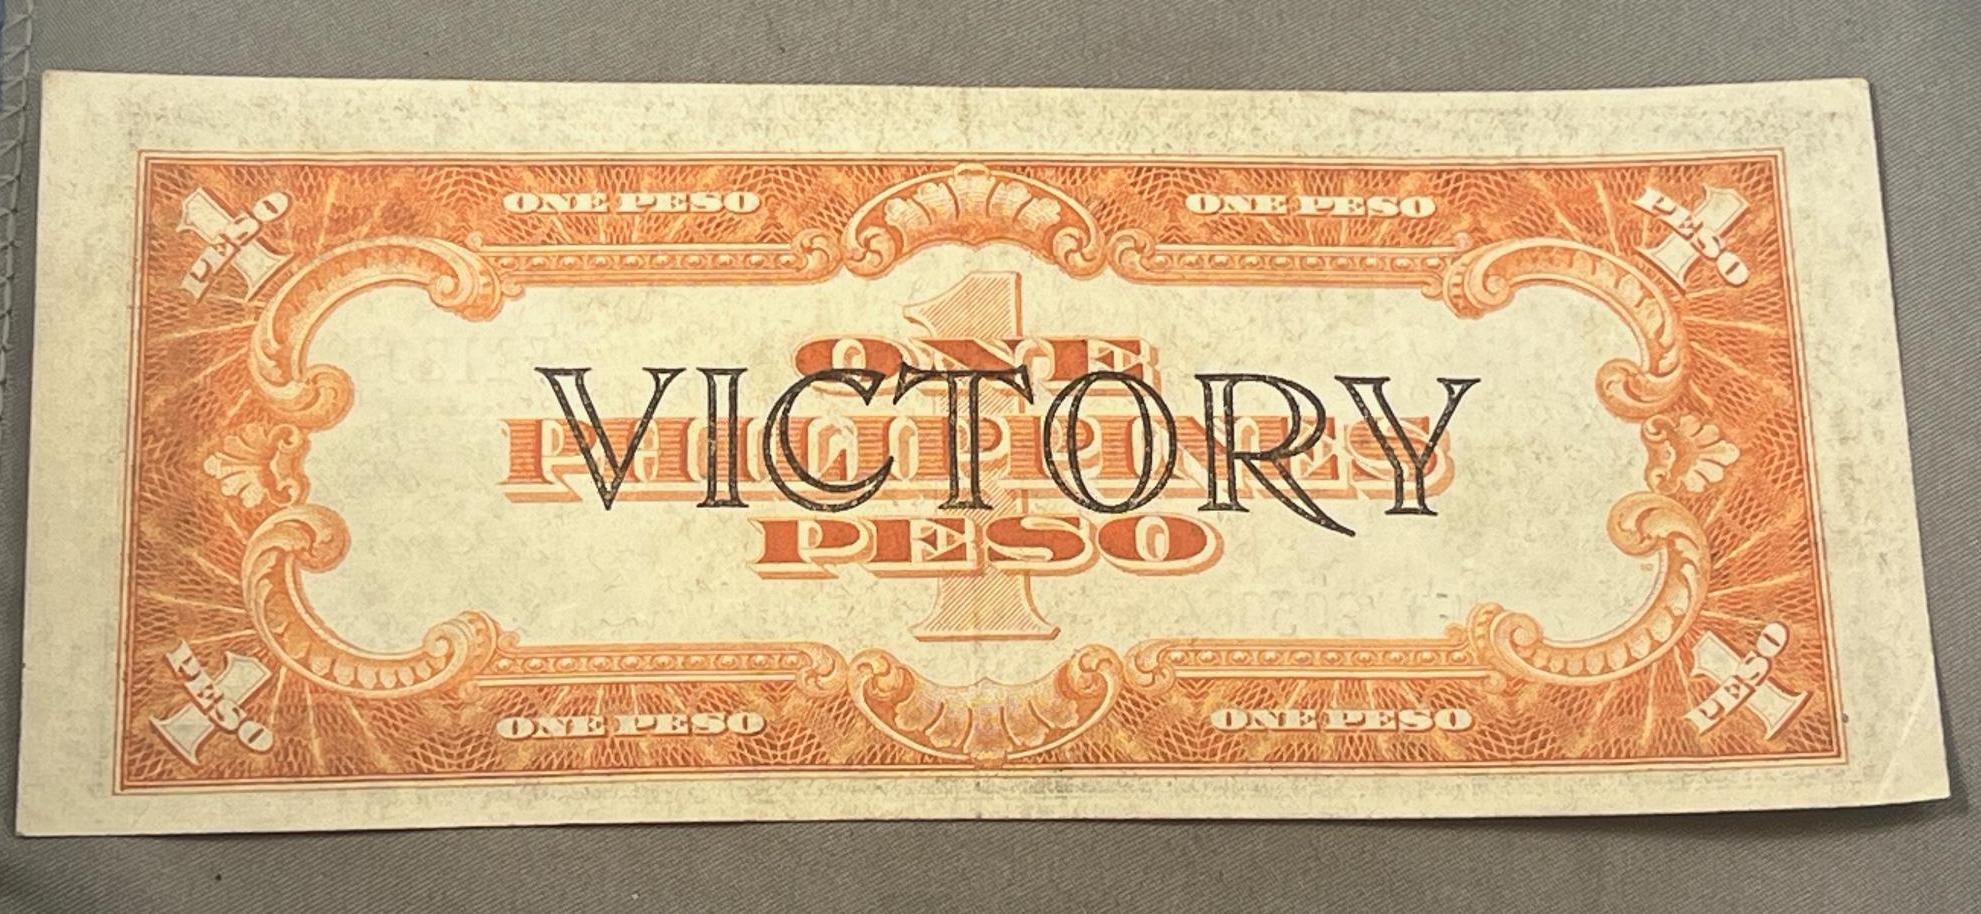 Victory Series no. 66 Philippines One Peso Bank Note, better quality